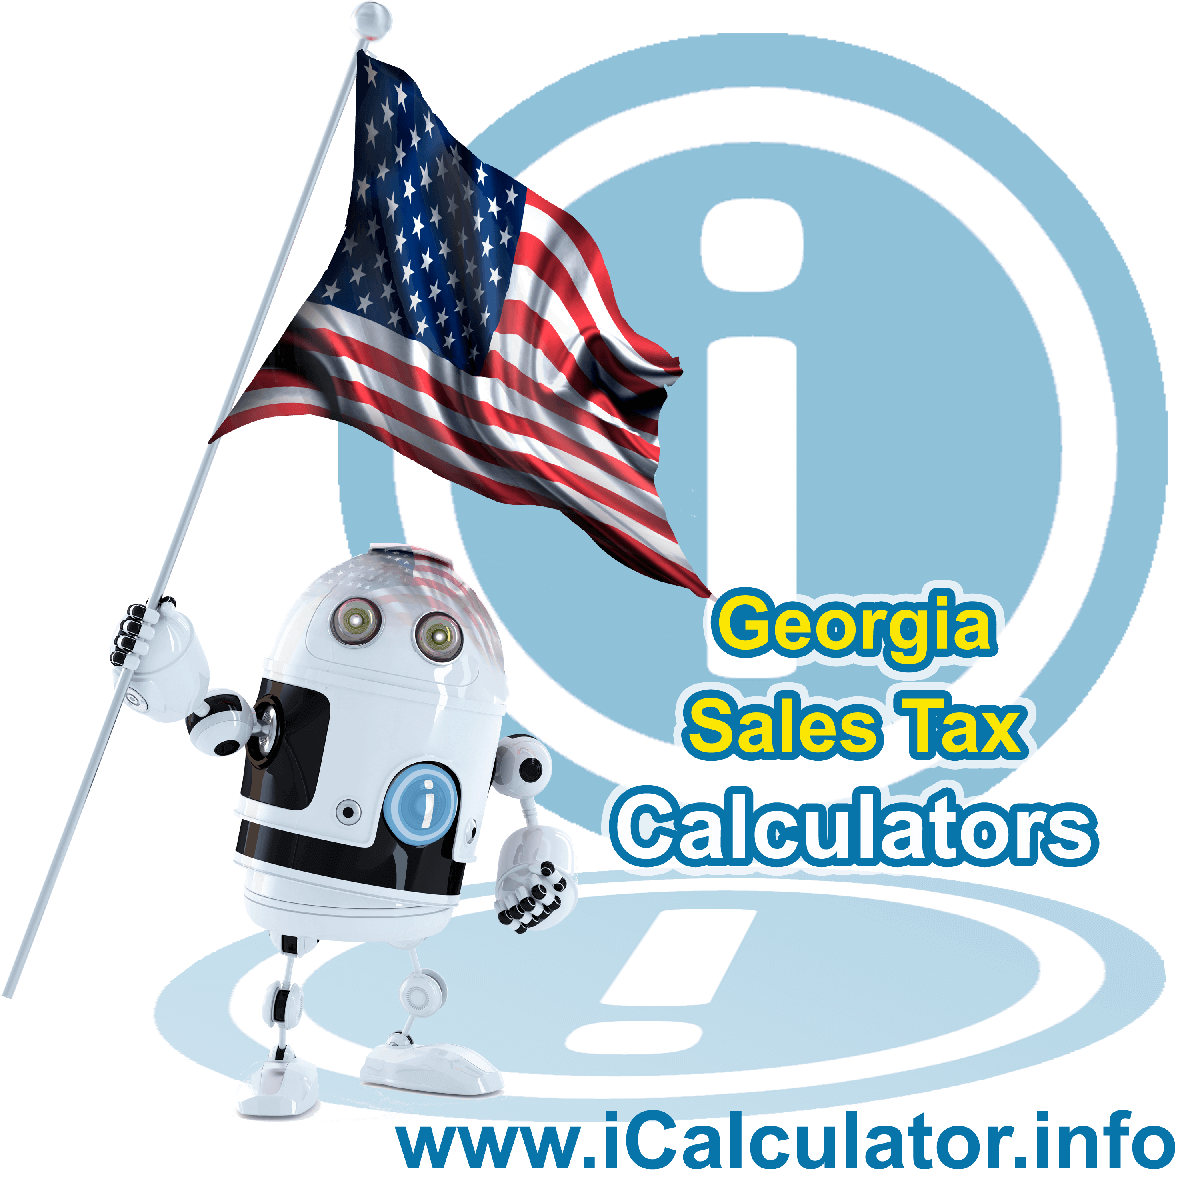 Georgia Sales Tax Comparison Calculator: This image illustrates a calculator robot comparing sales tax in Georgia manually using the Georgia Sales Tax Formula. You can use this information to compare Sales Tax manually or use the Georgia Sales Tax Comparison Calculator to calculate and compare Georgia sales tax online.